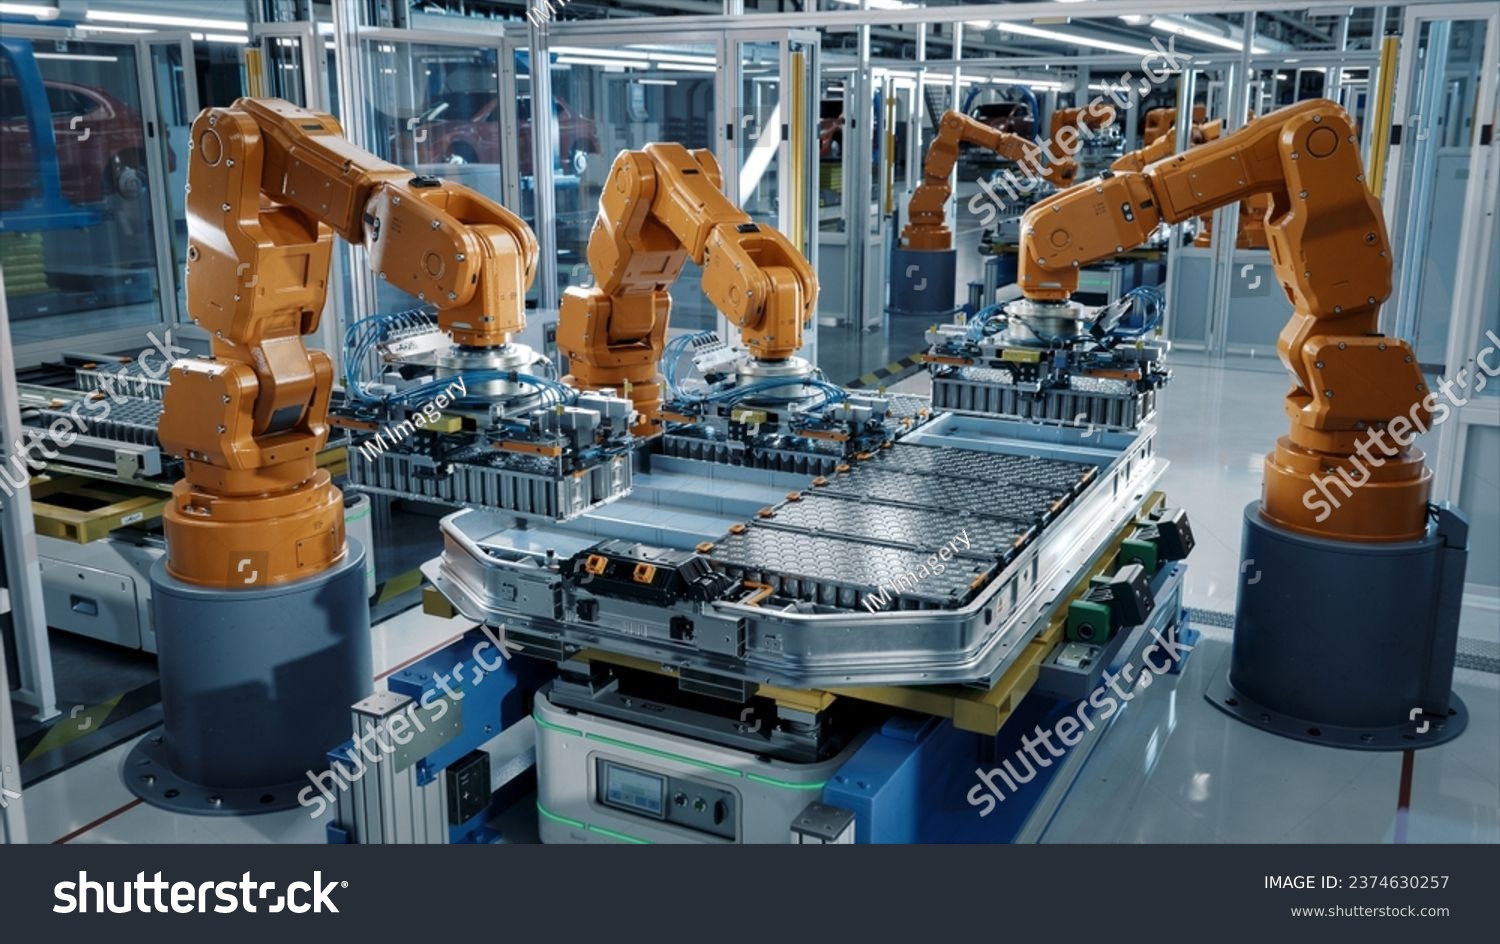 Advanced Orange Industrial Robot Arms Assemble EV Battery Pack on Automated Production Line. Row of Robotic Arms inside Automotive Plant Assemble Batteries. Modern Electric Car Smart Factory. #2374630257